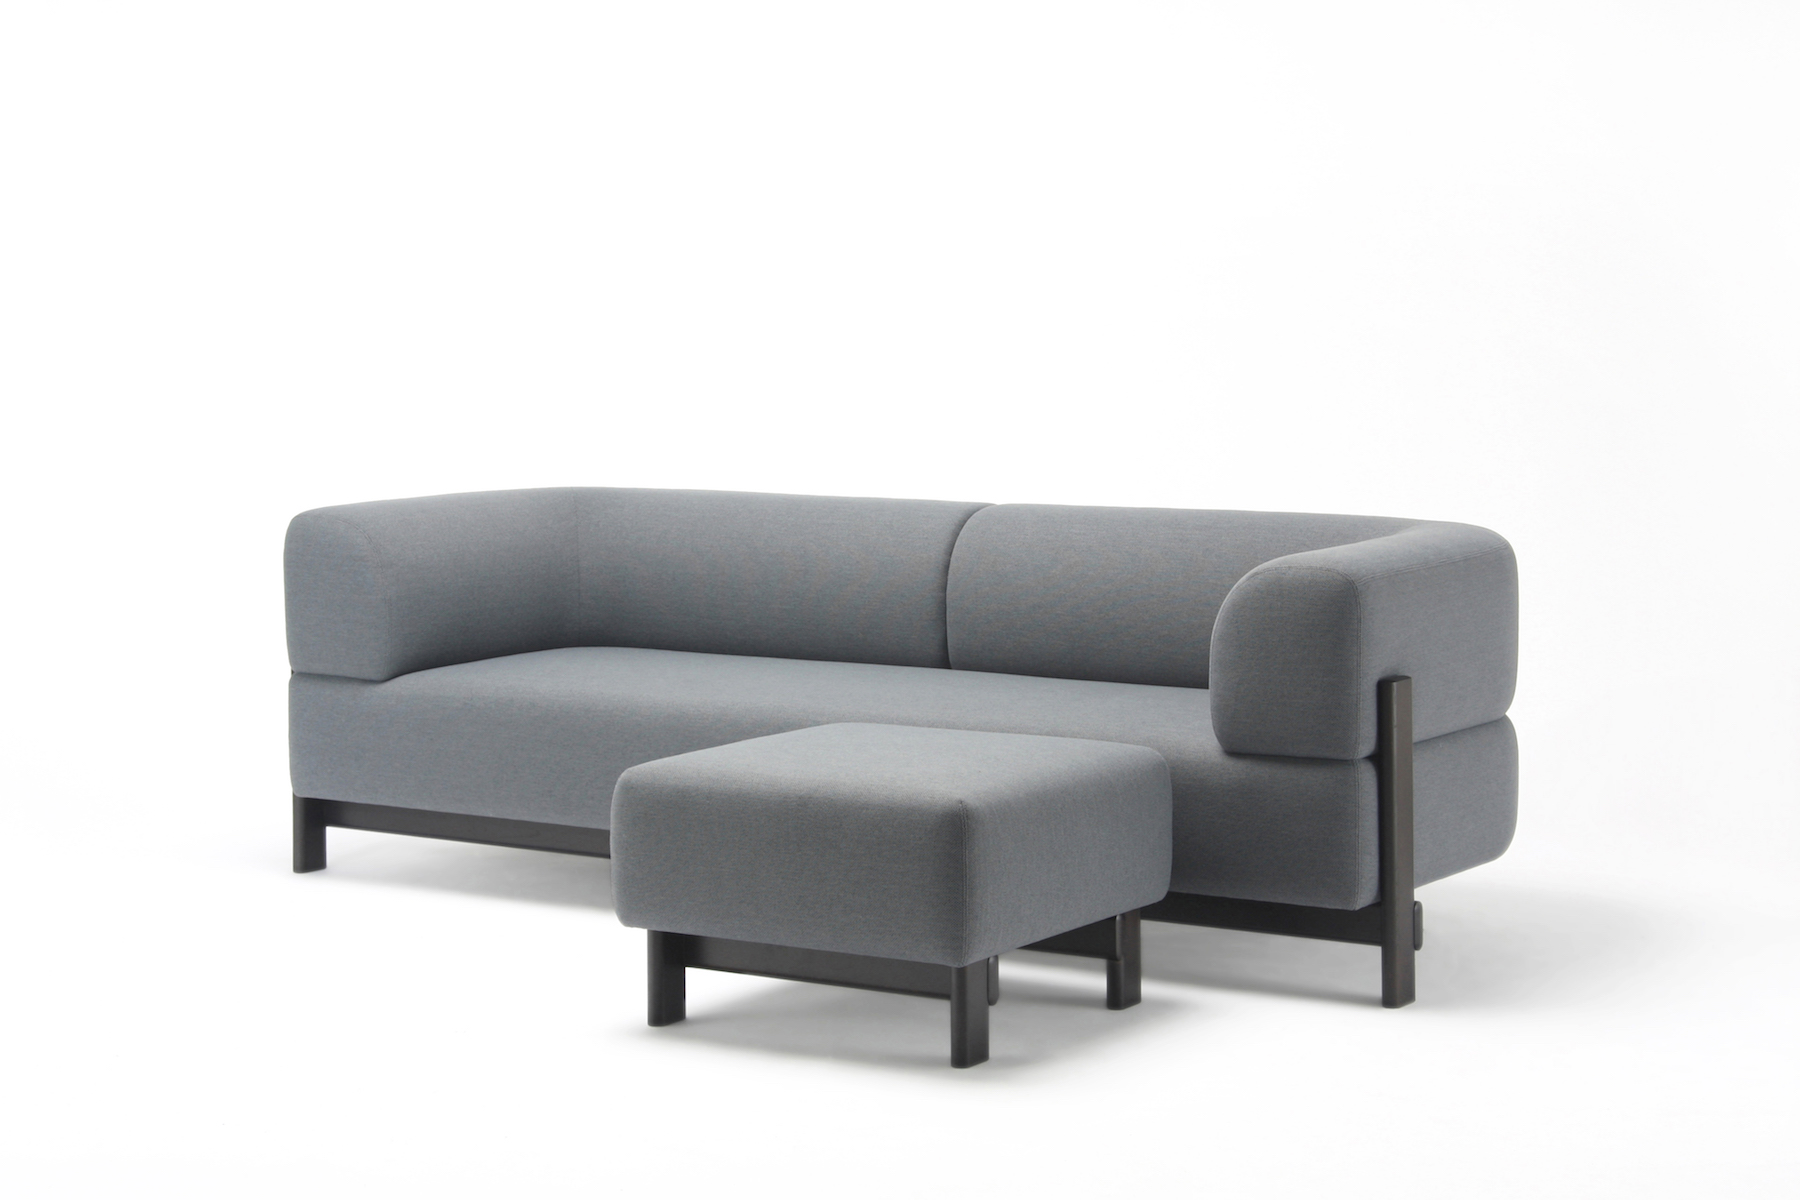 Elephant Sofa Collection by Christian Haas